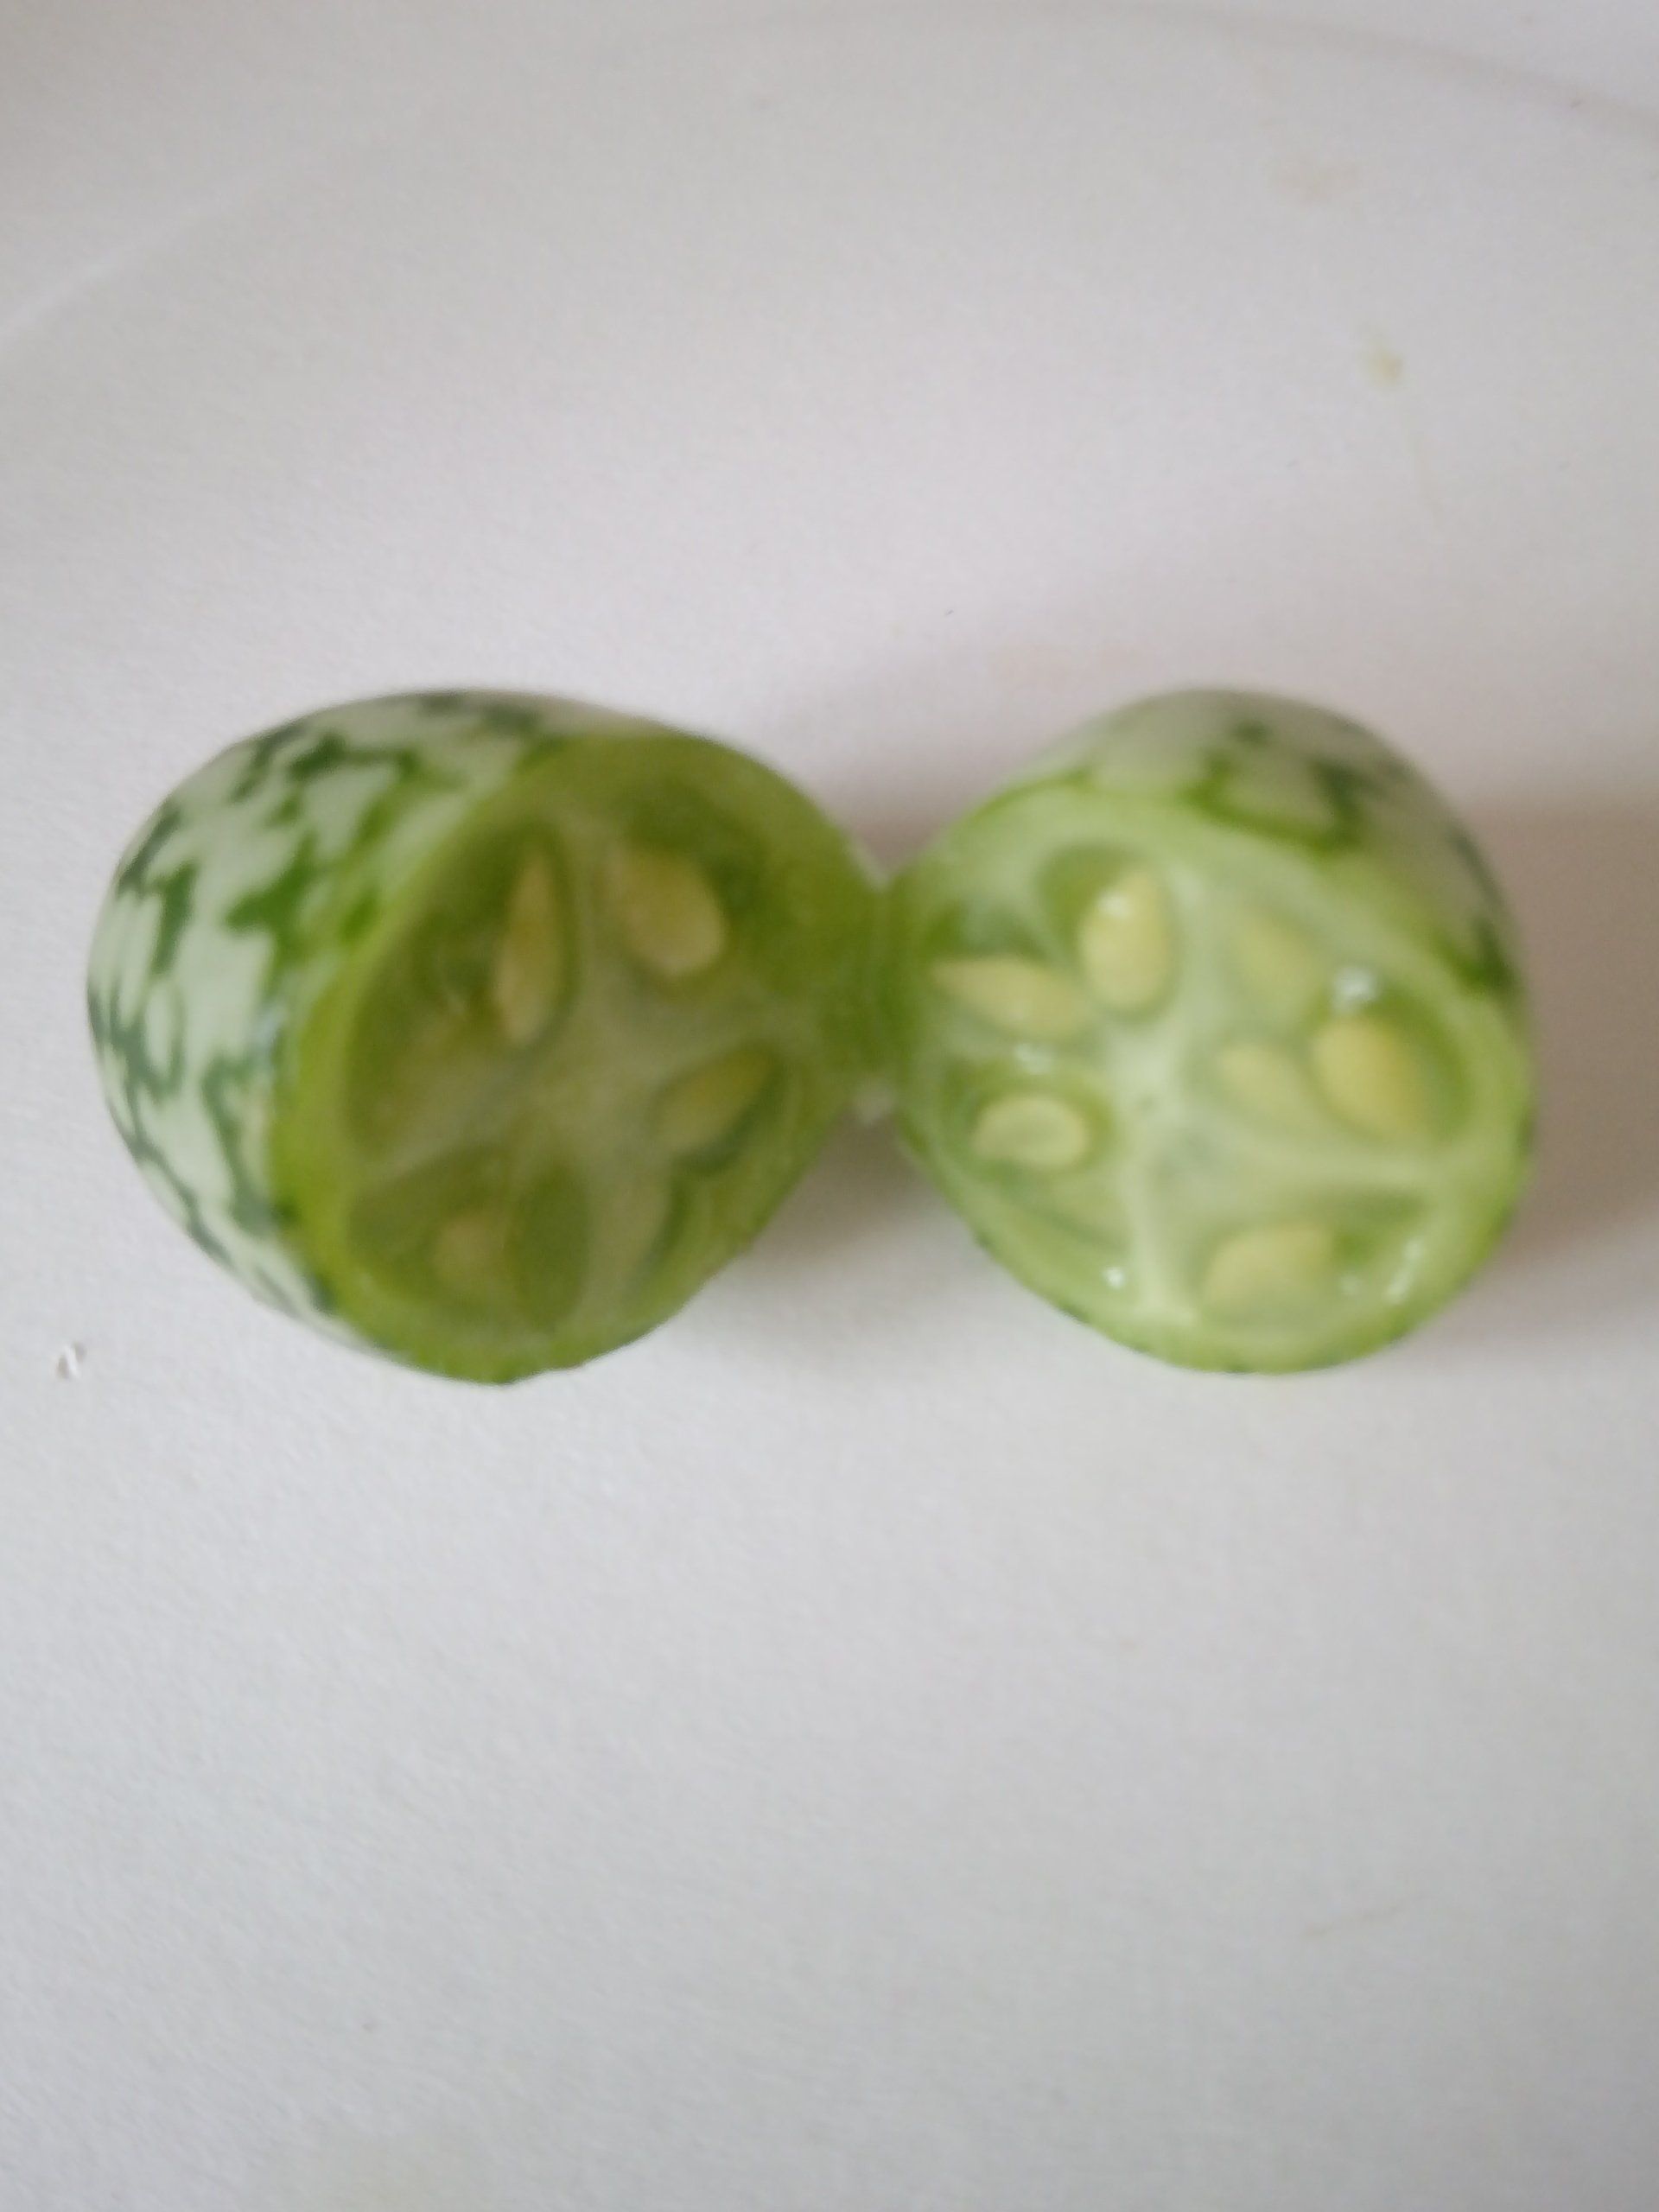 Cucamelons Cut in Half Showing the Seeds